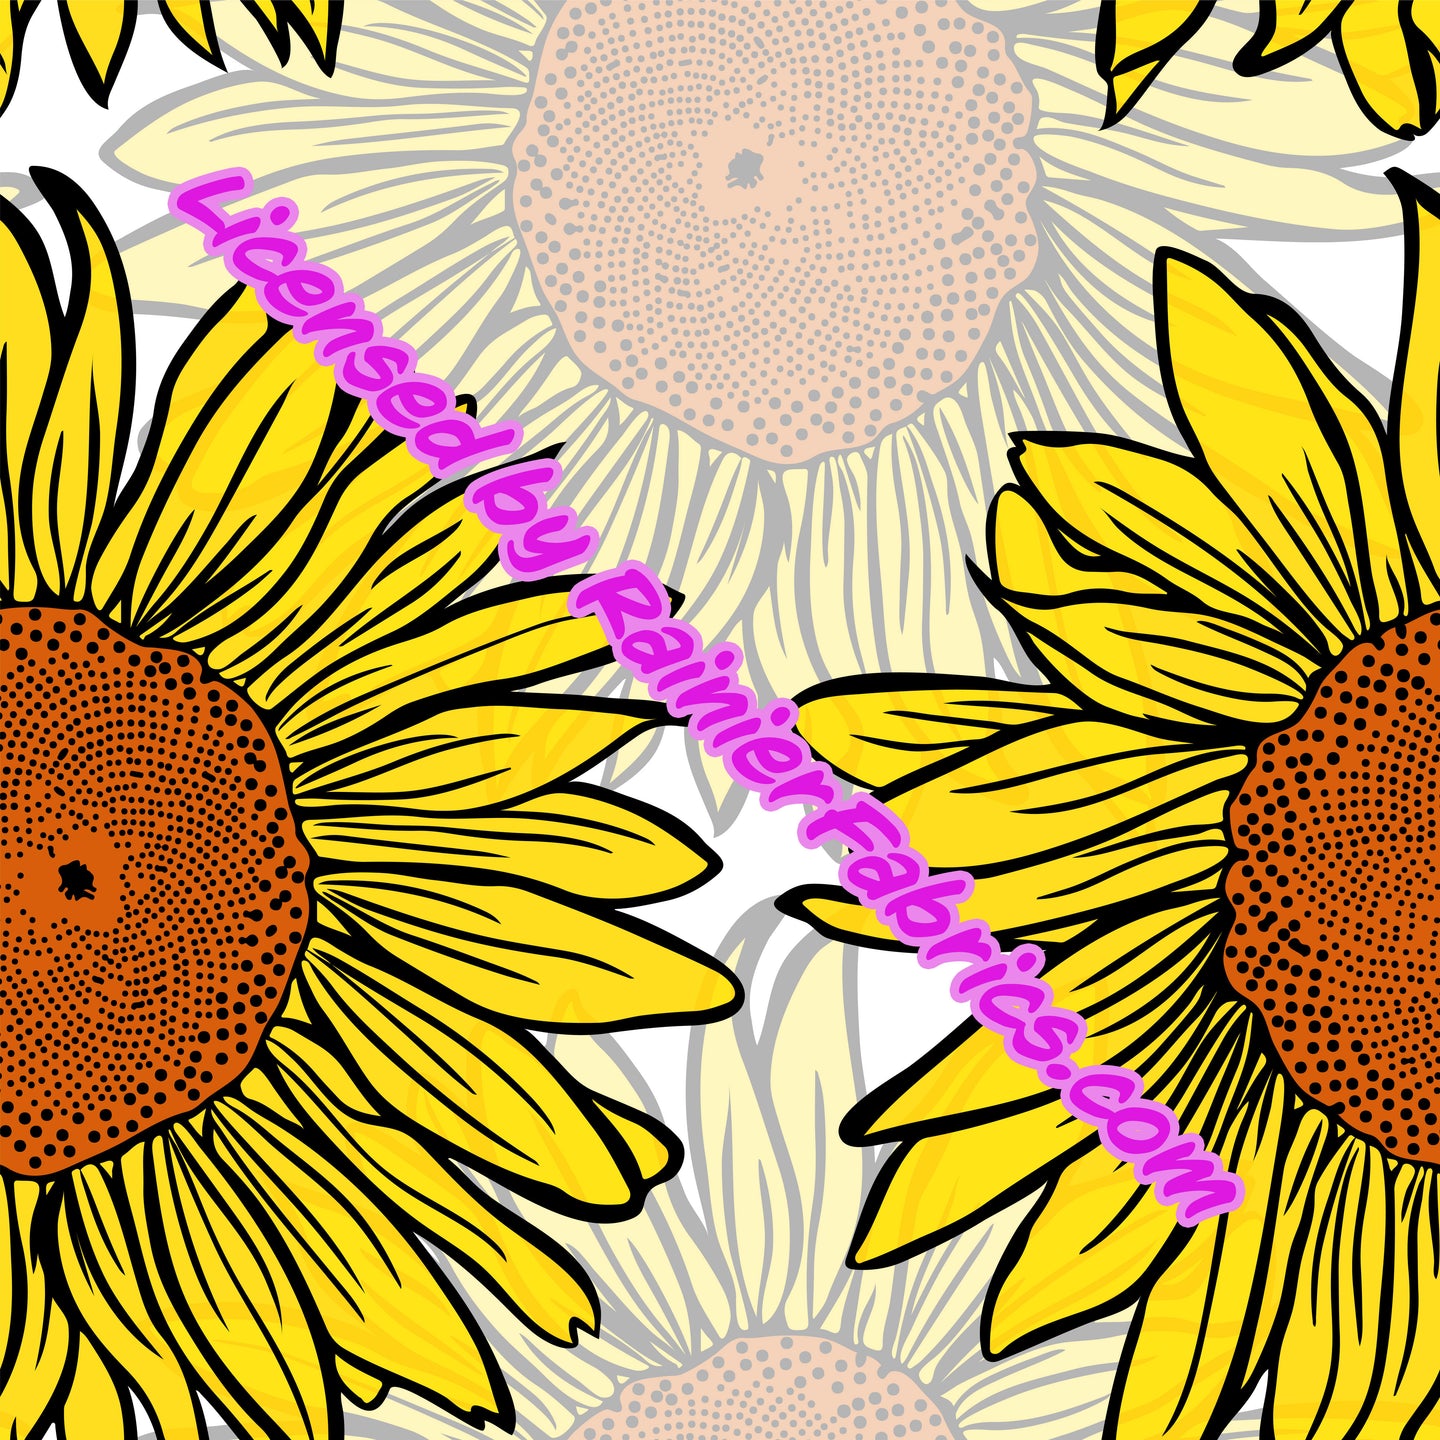 Large Sunflowers - 2-5 day turnaround - Order by 1/2 yard; Description of bases below